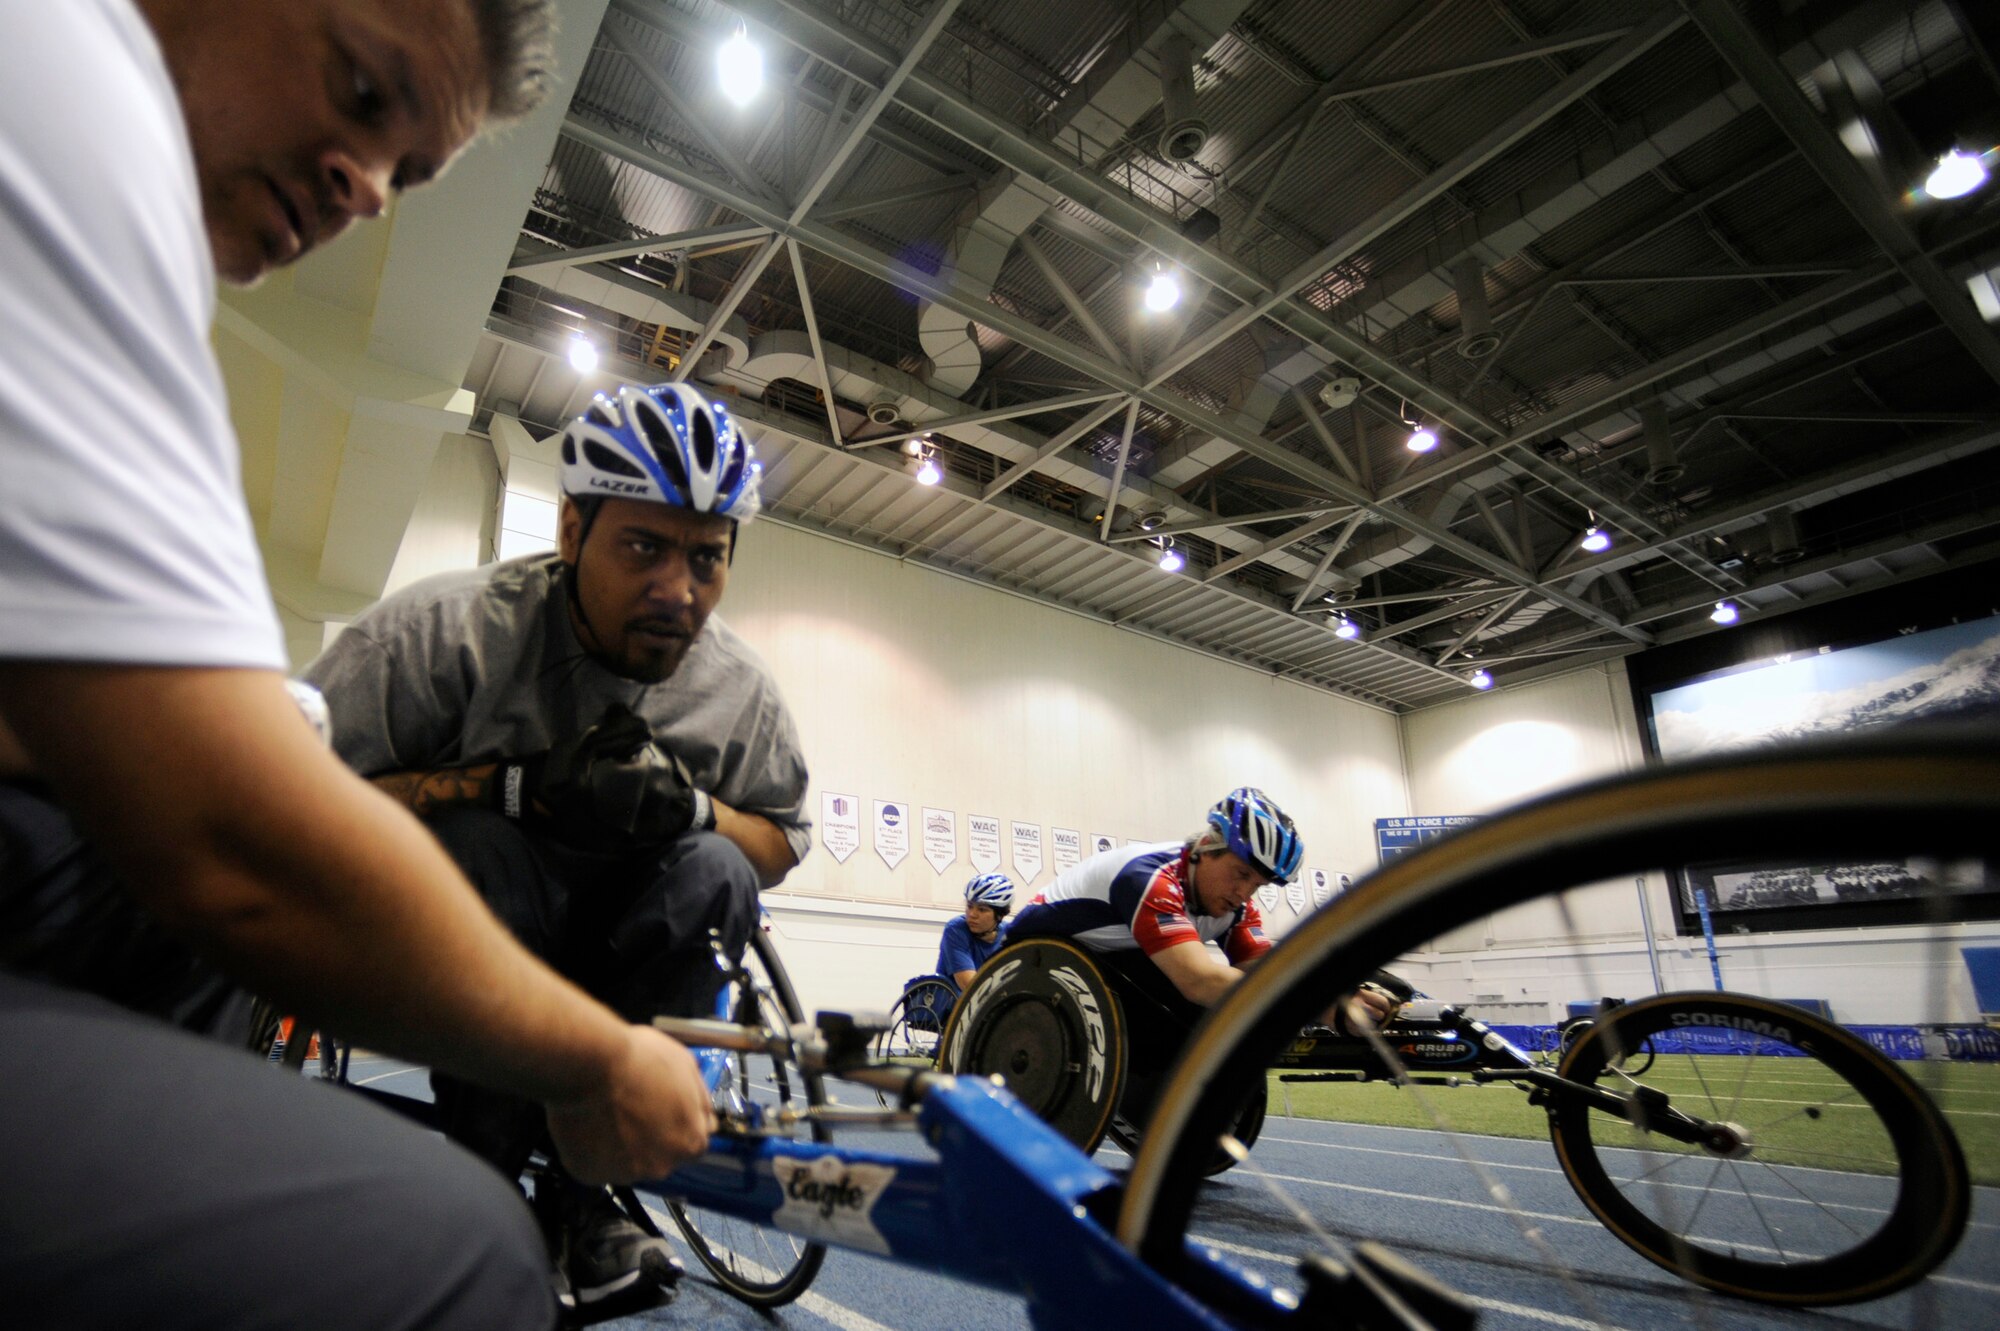 Former Senior Airman Darrell Fisher gets his racing chair adjusted by his coach before cycle practice at the U.S. Air Force Academy indoor track during the Air Force's Warrior Games training camp  April 17, 2013, in Colorado Springs, Colo. Fisher was incurred a gunshot wound that left him paralyzed. Fisher resides in Colombia, S.C. (U.S. Air Force photo/Desiree Palacios)